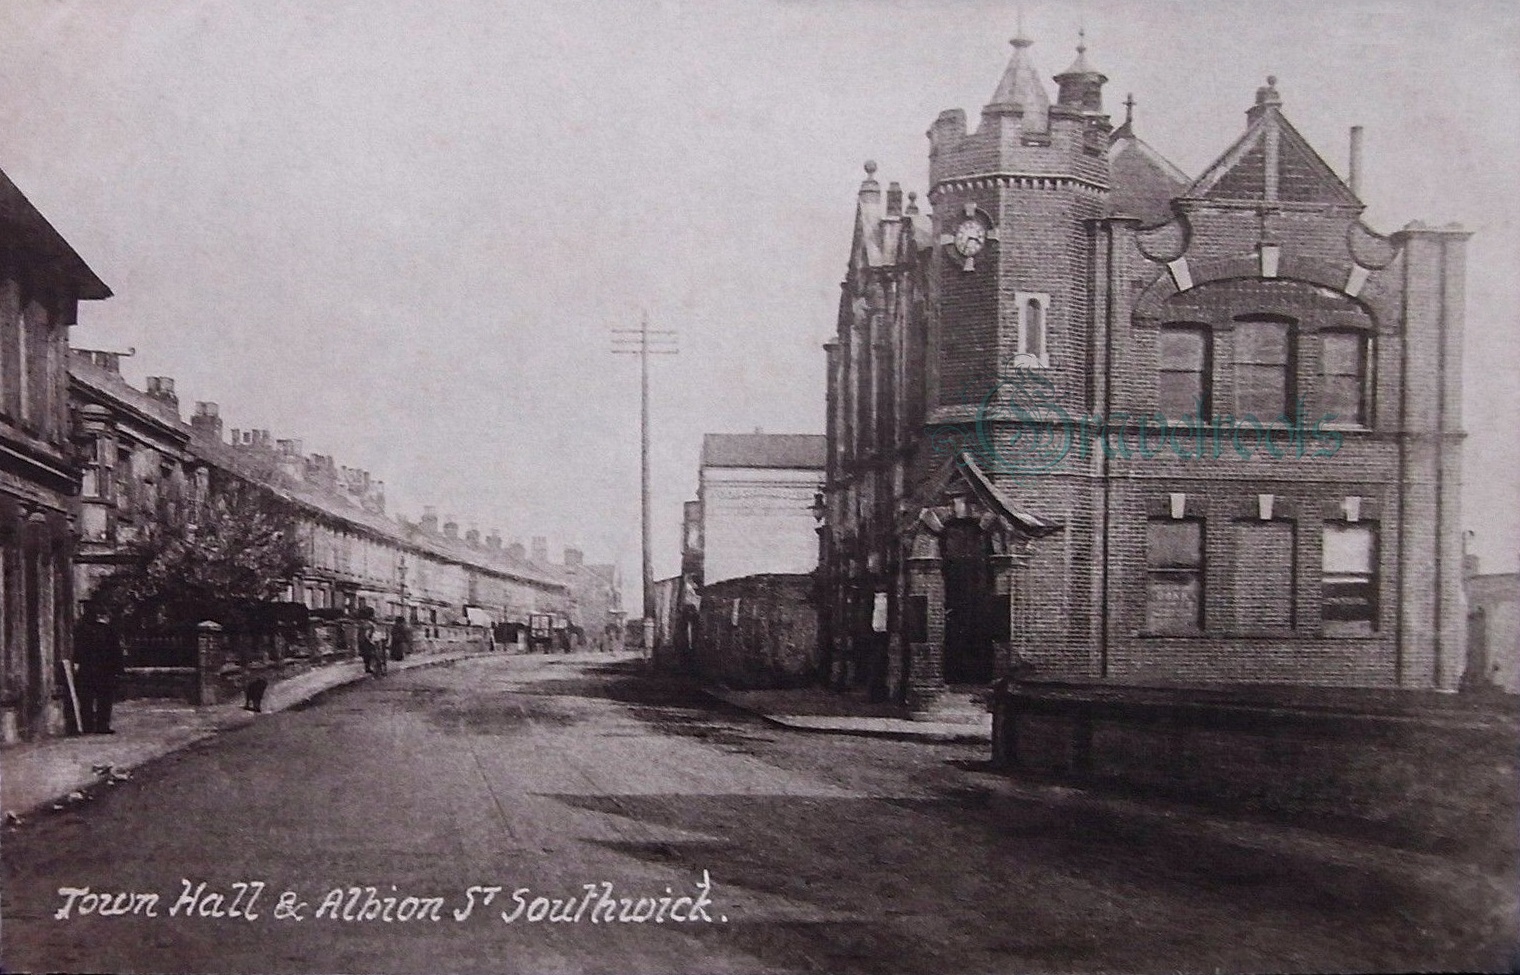 Old photo of Albion Street, Southwick - click image below to return